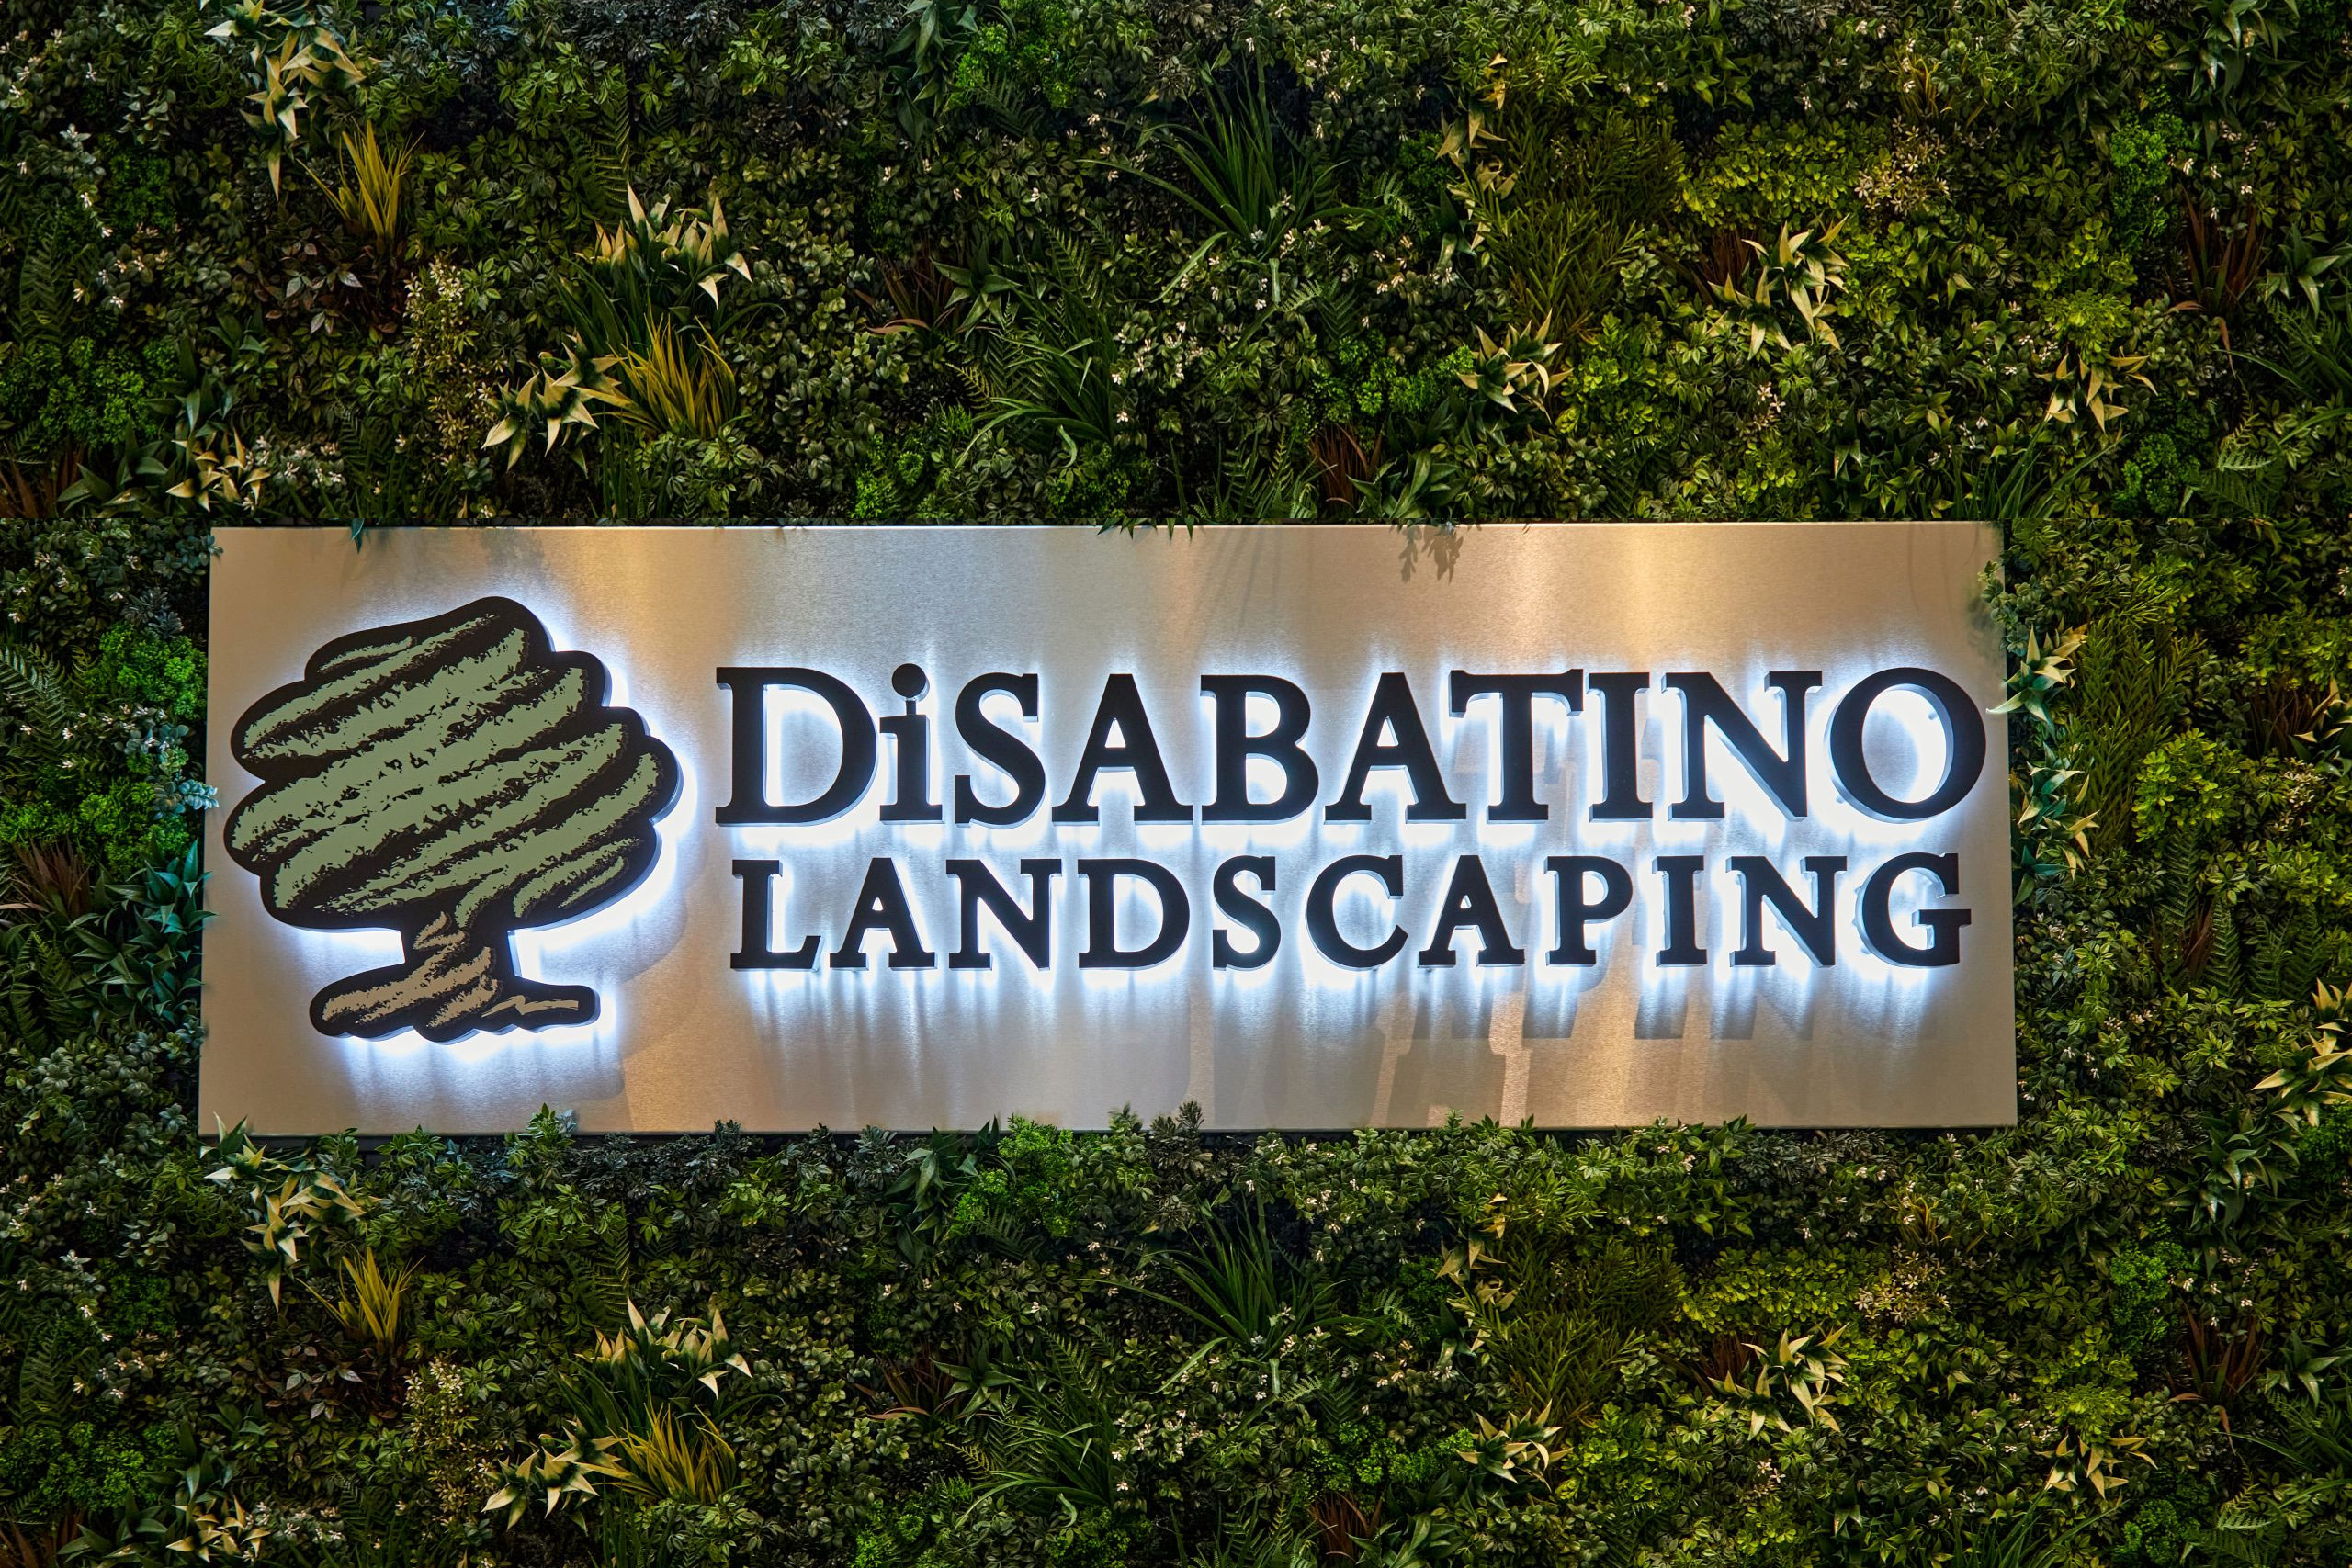 An interior lighted sign for a business place, surrounded by an espaliar designed tree